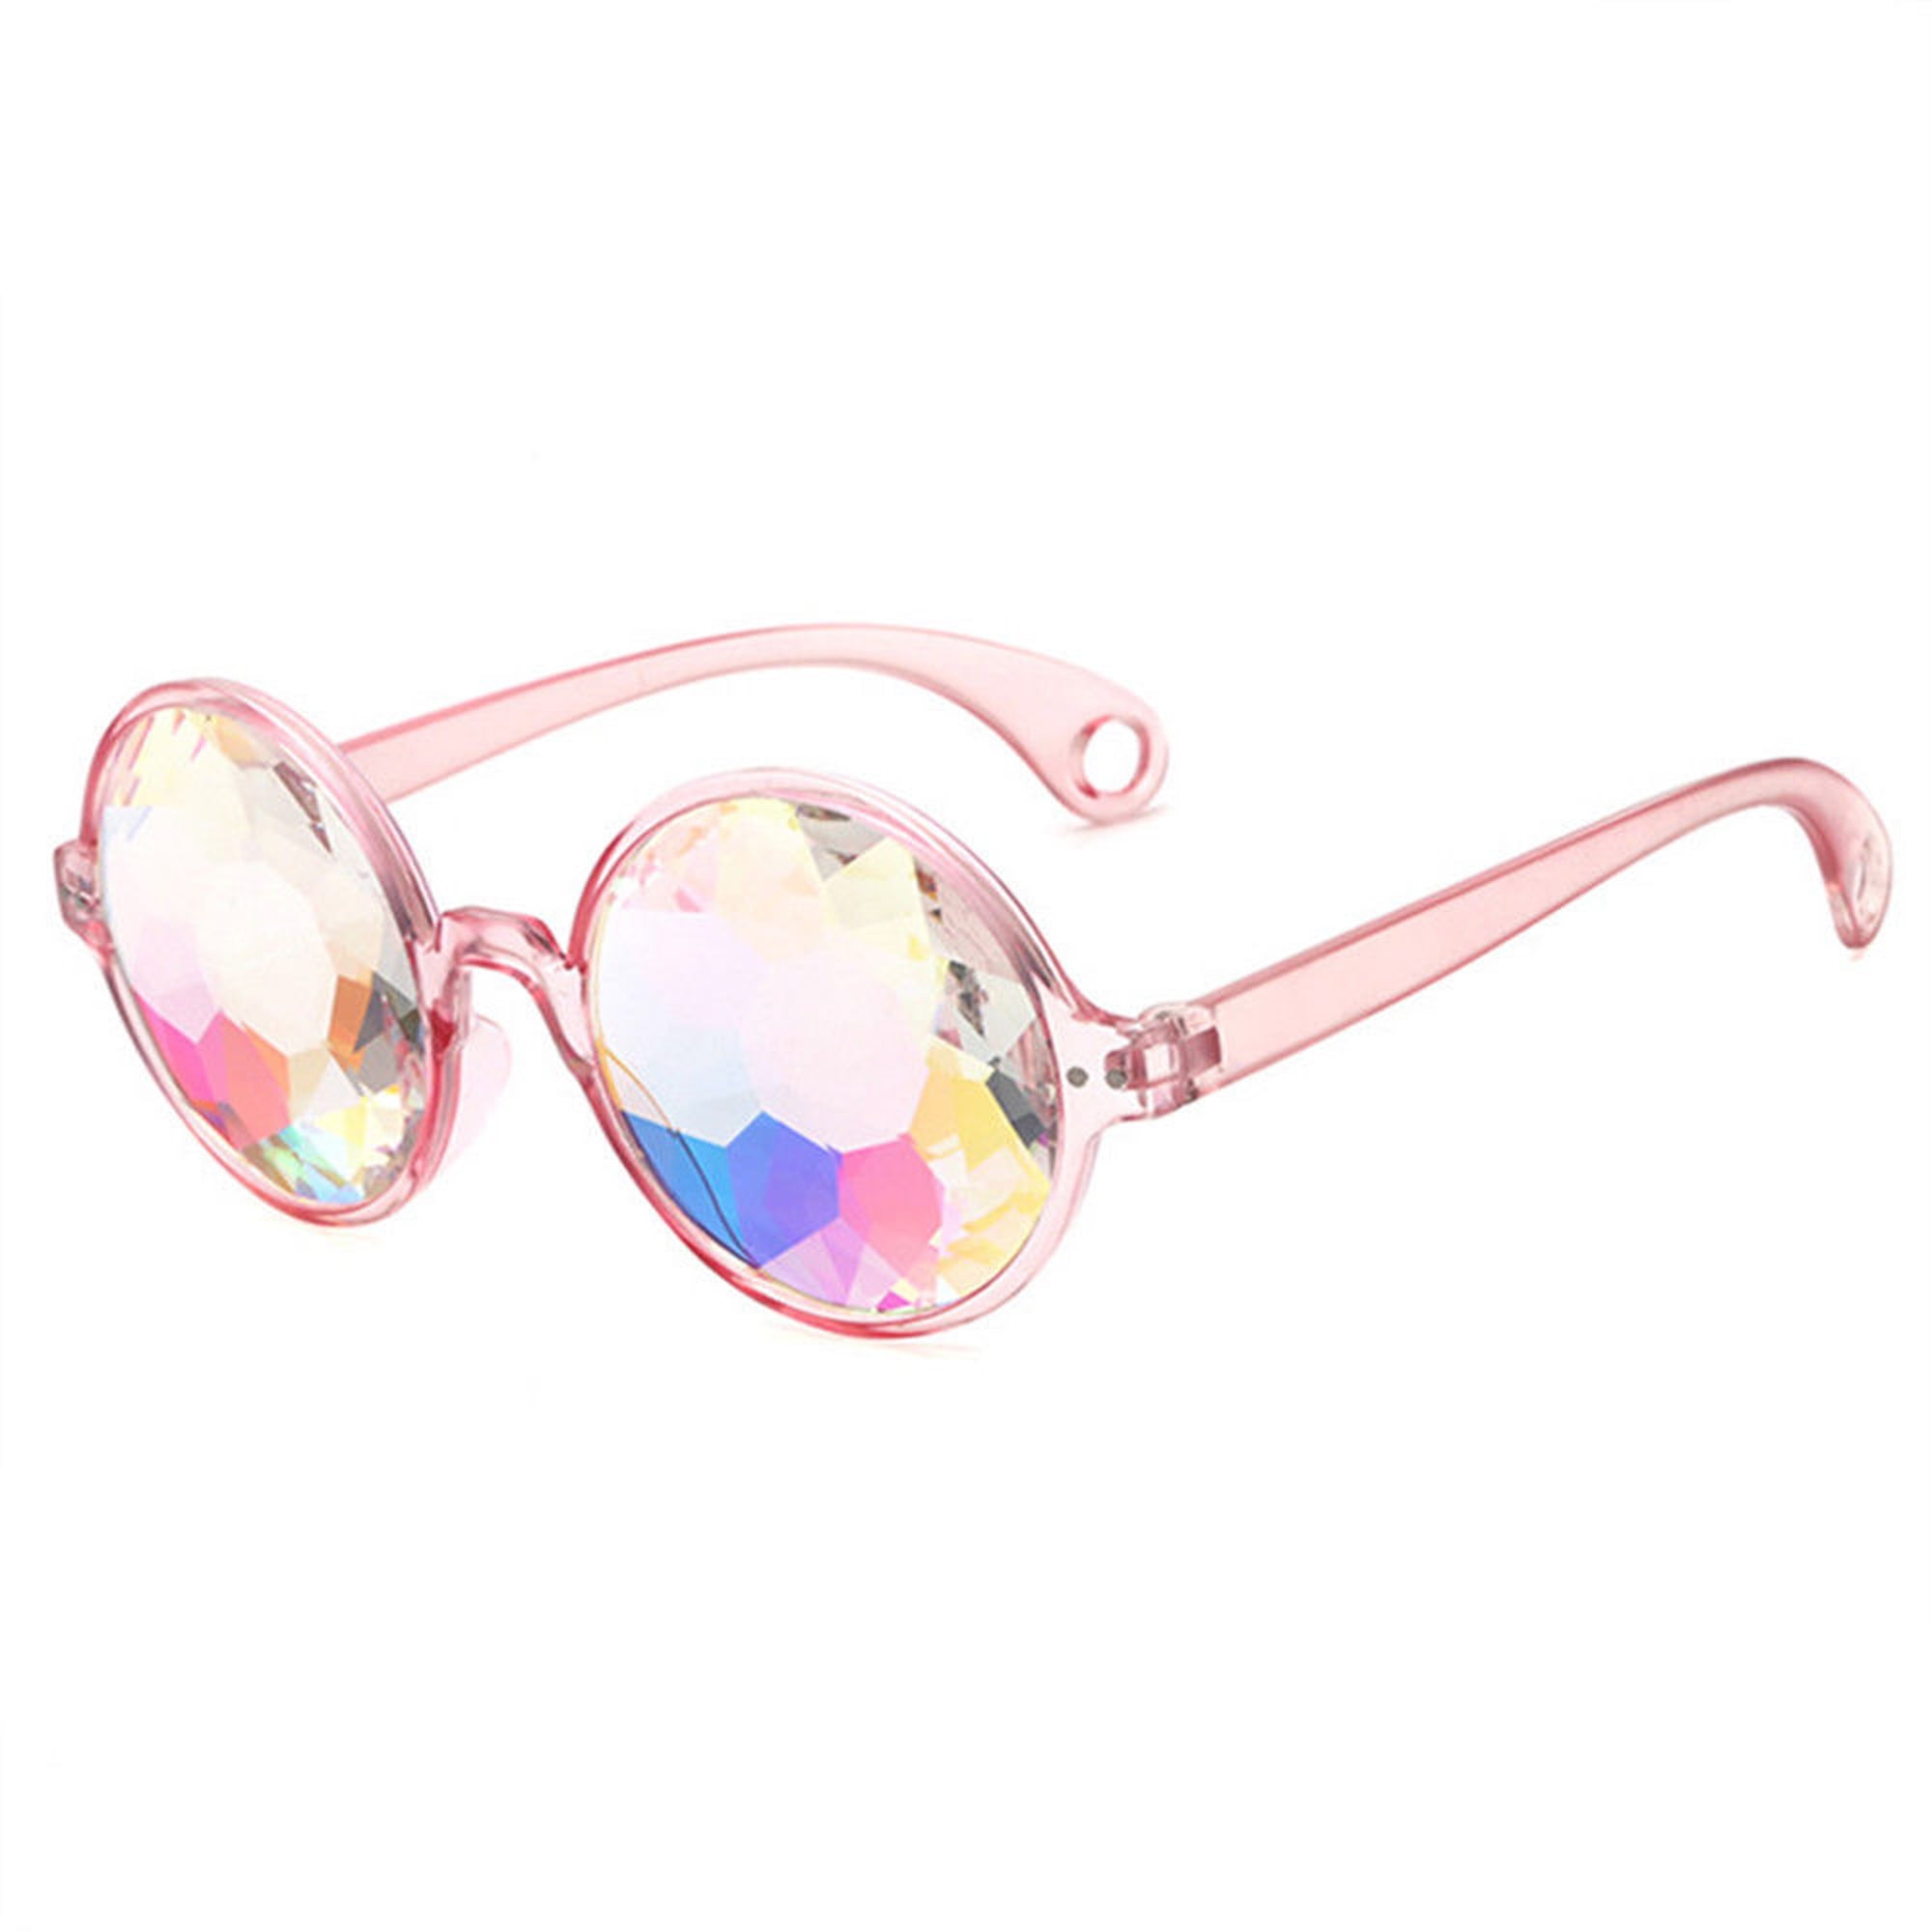 UV Glow in The Dark Steampunk Rave Goggles Prism Retro Round Diffraction Glasses Pink Frames 